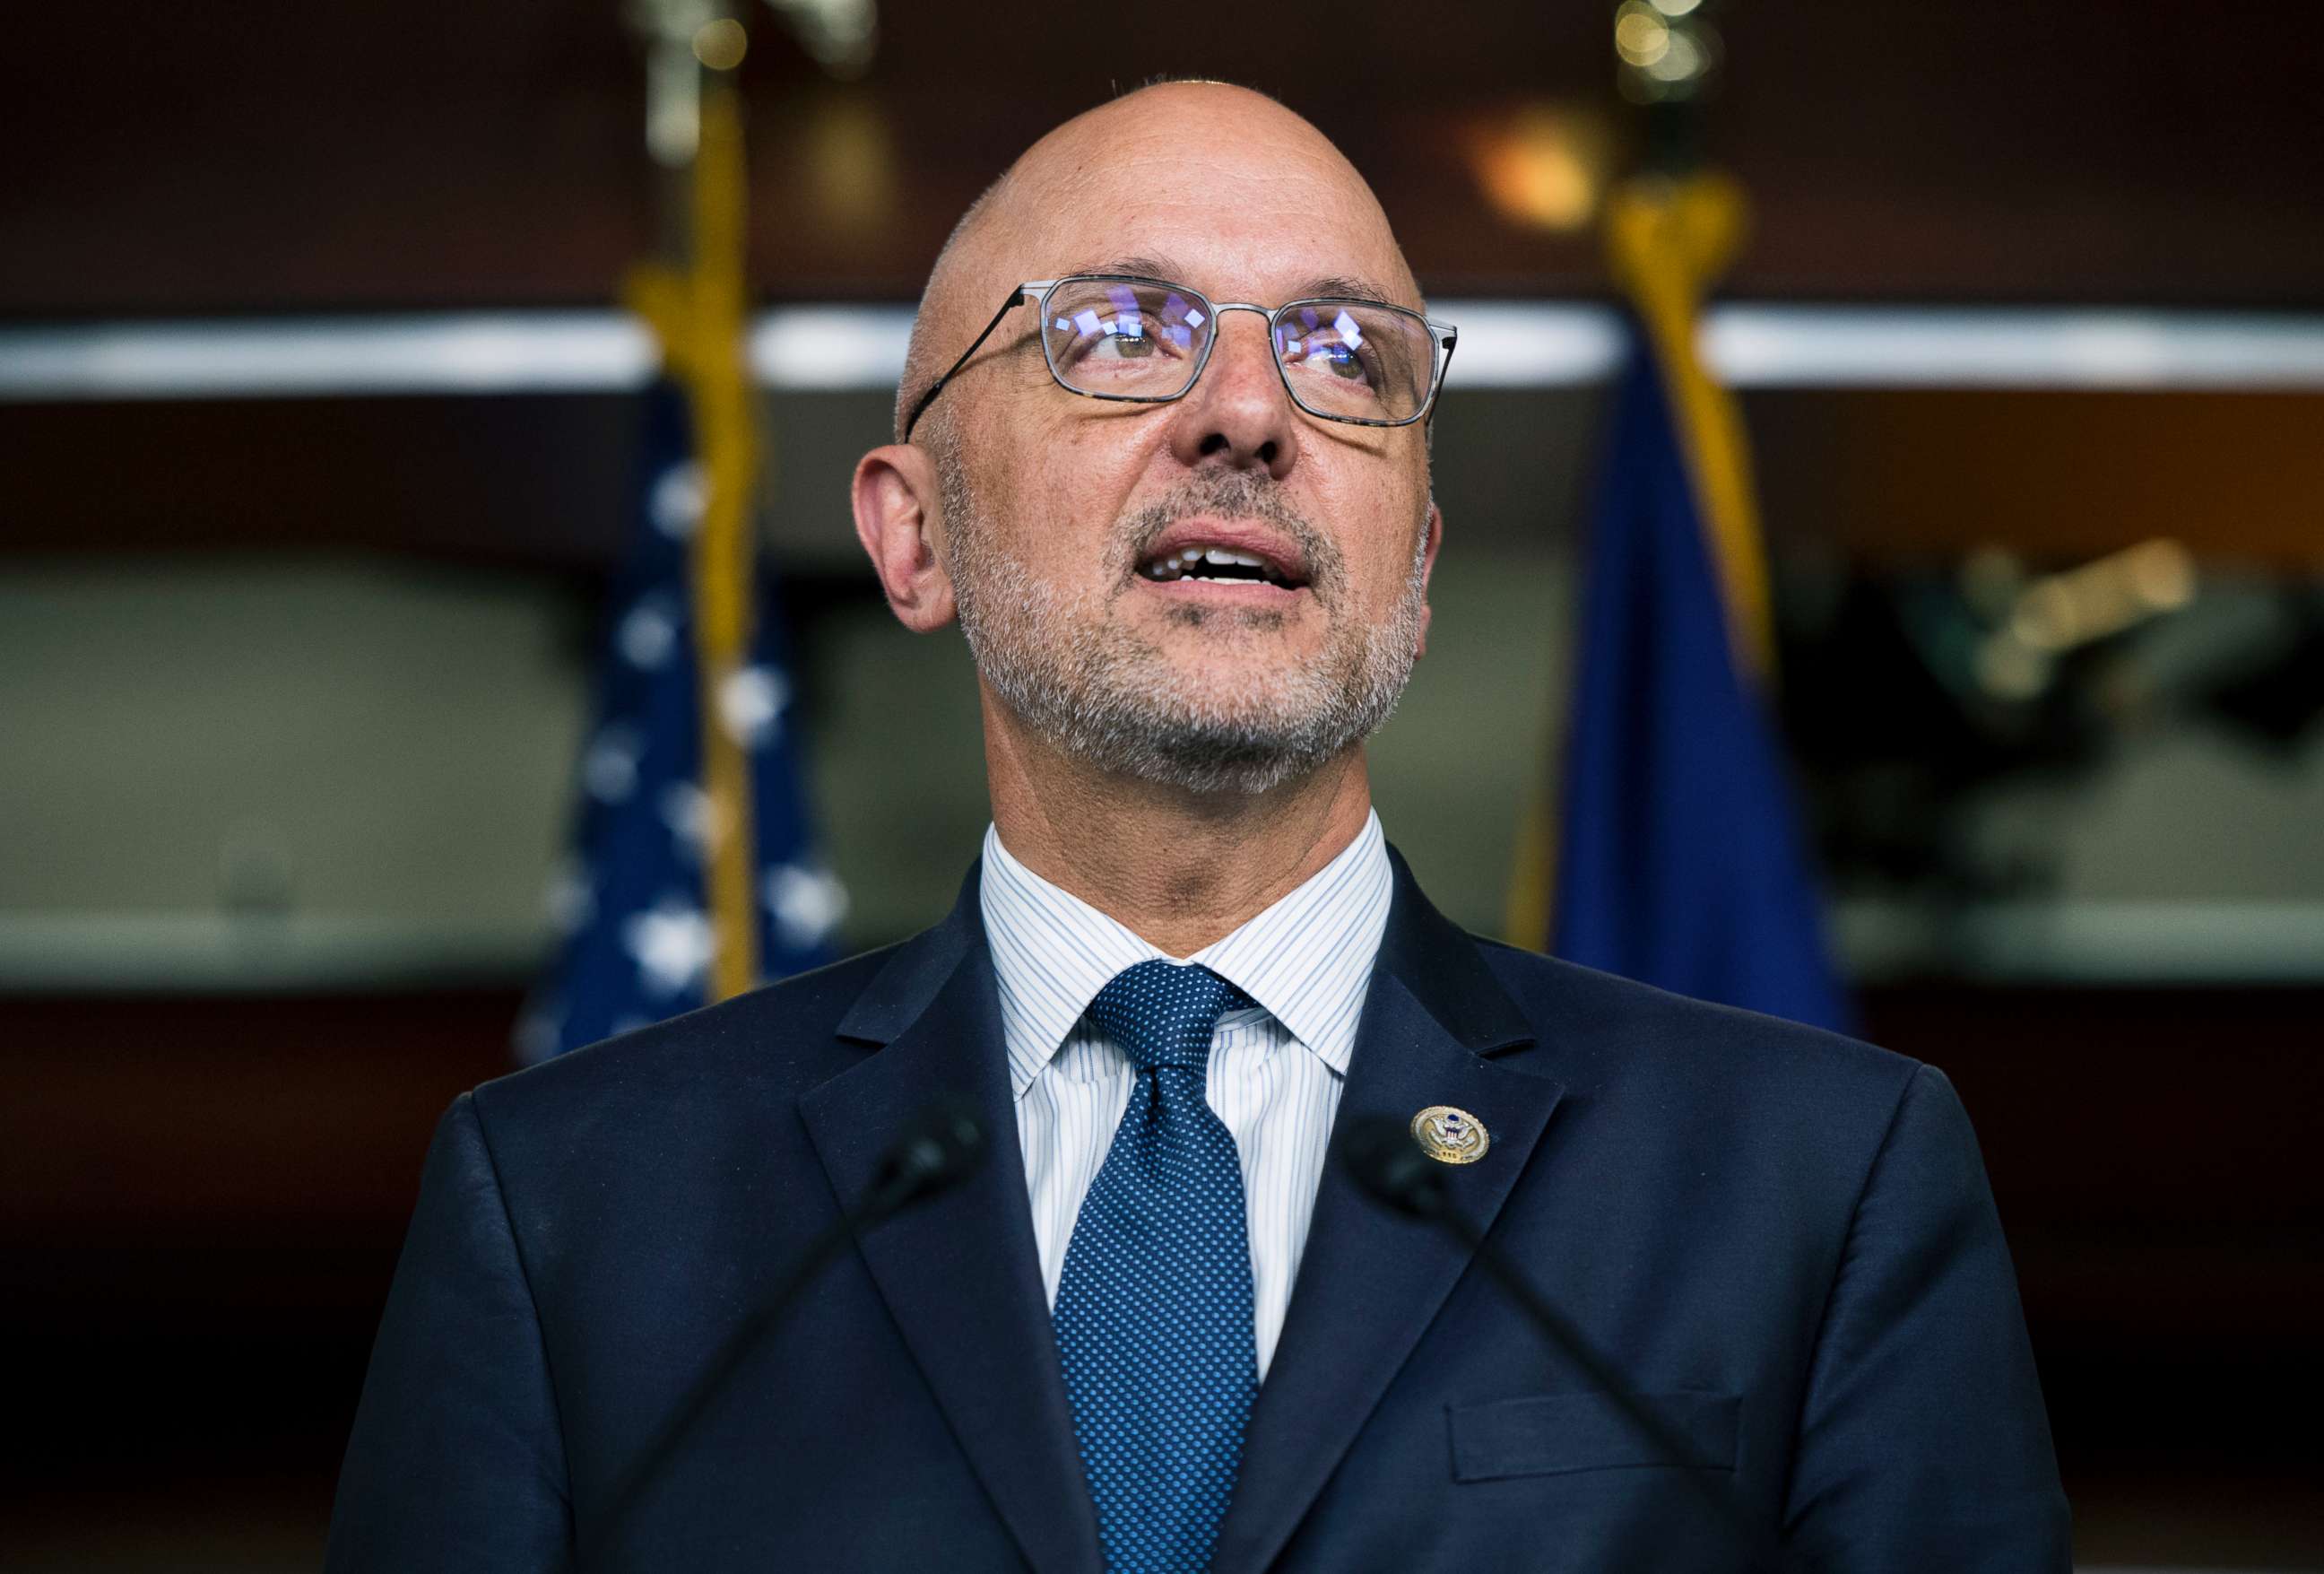 PHOTO: Ted Deutch speaks during a news conference on new gun reform legislation at the Capitol, May 9, 2018, in Washington, DC.